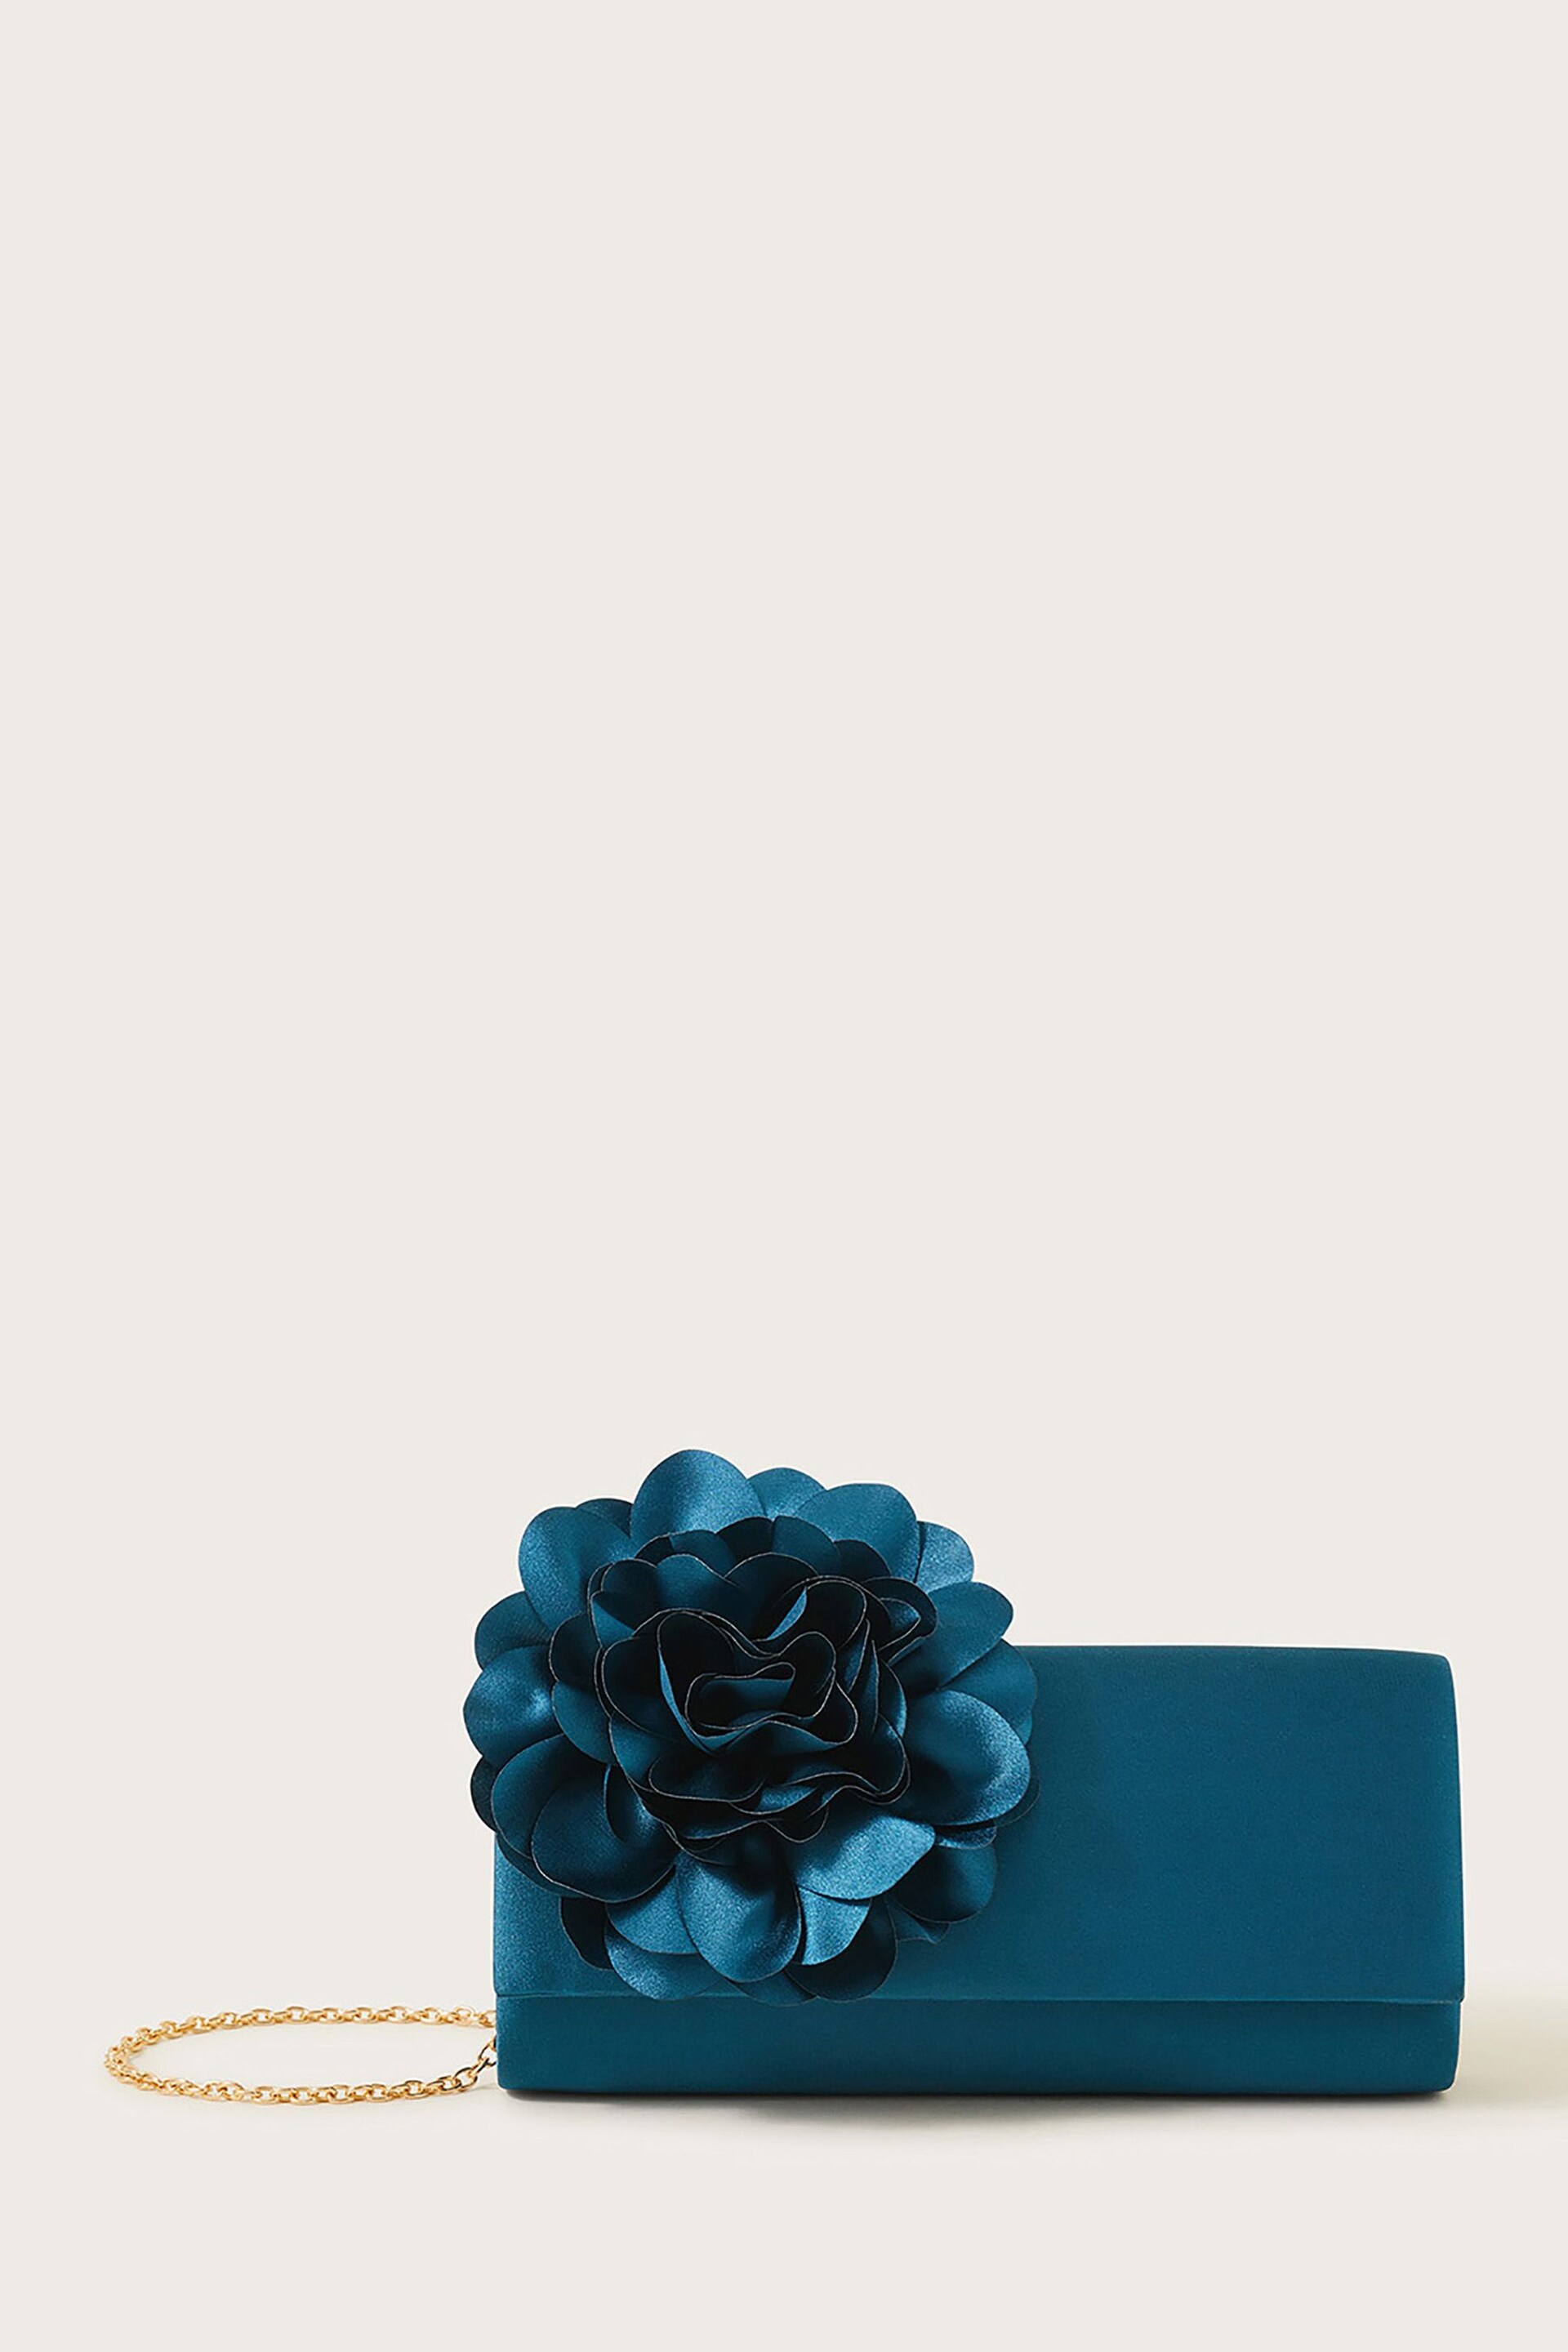 Monsoon Blue Navy Corsage Occasion Bag - Image 1 of 3